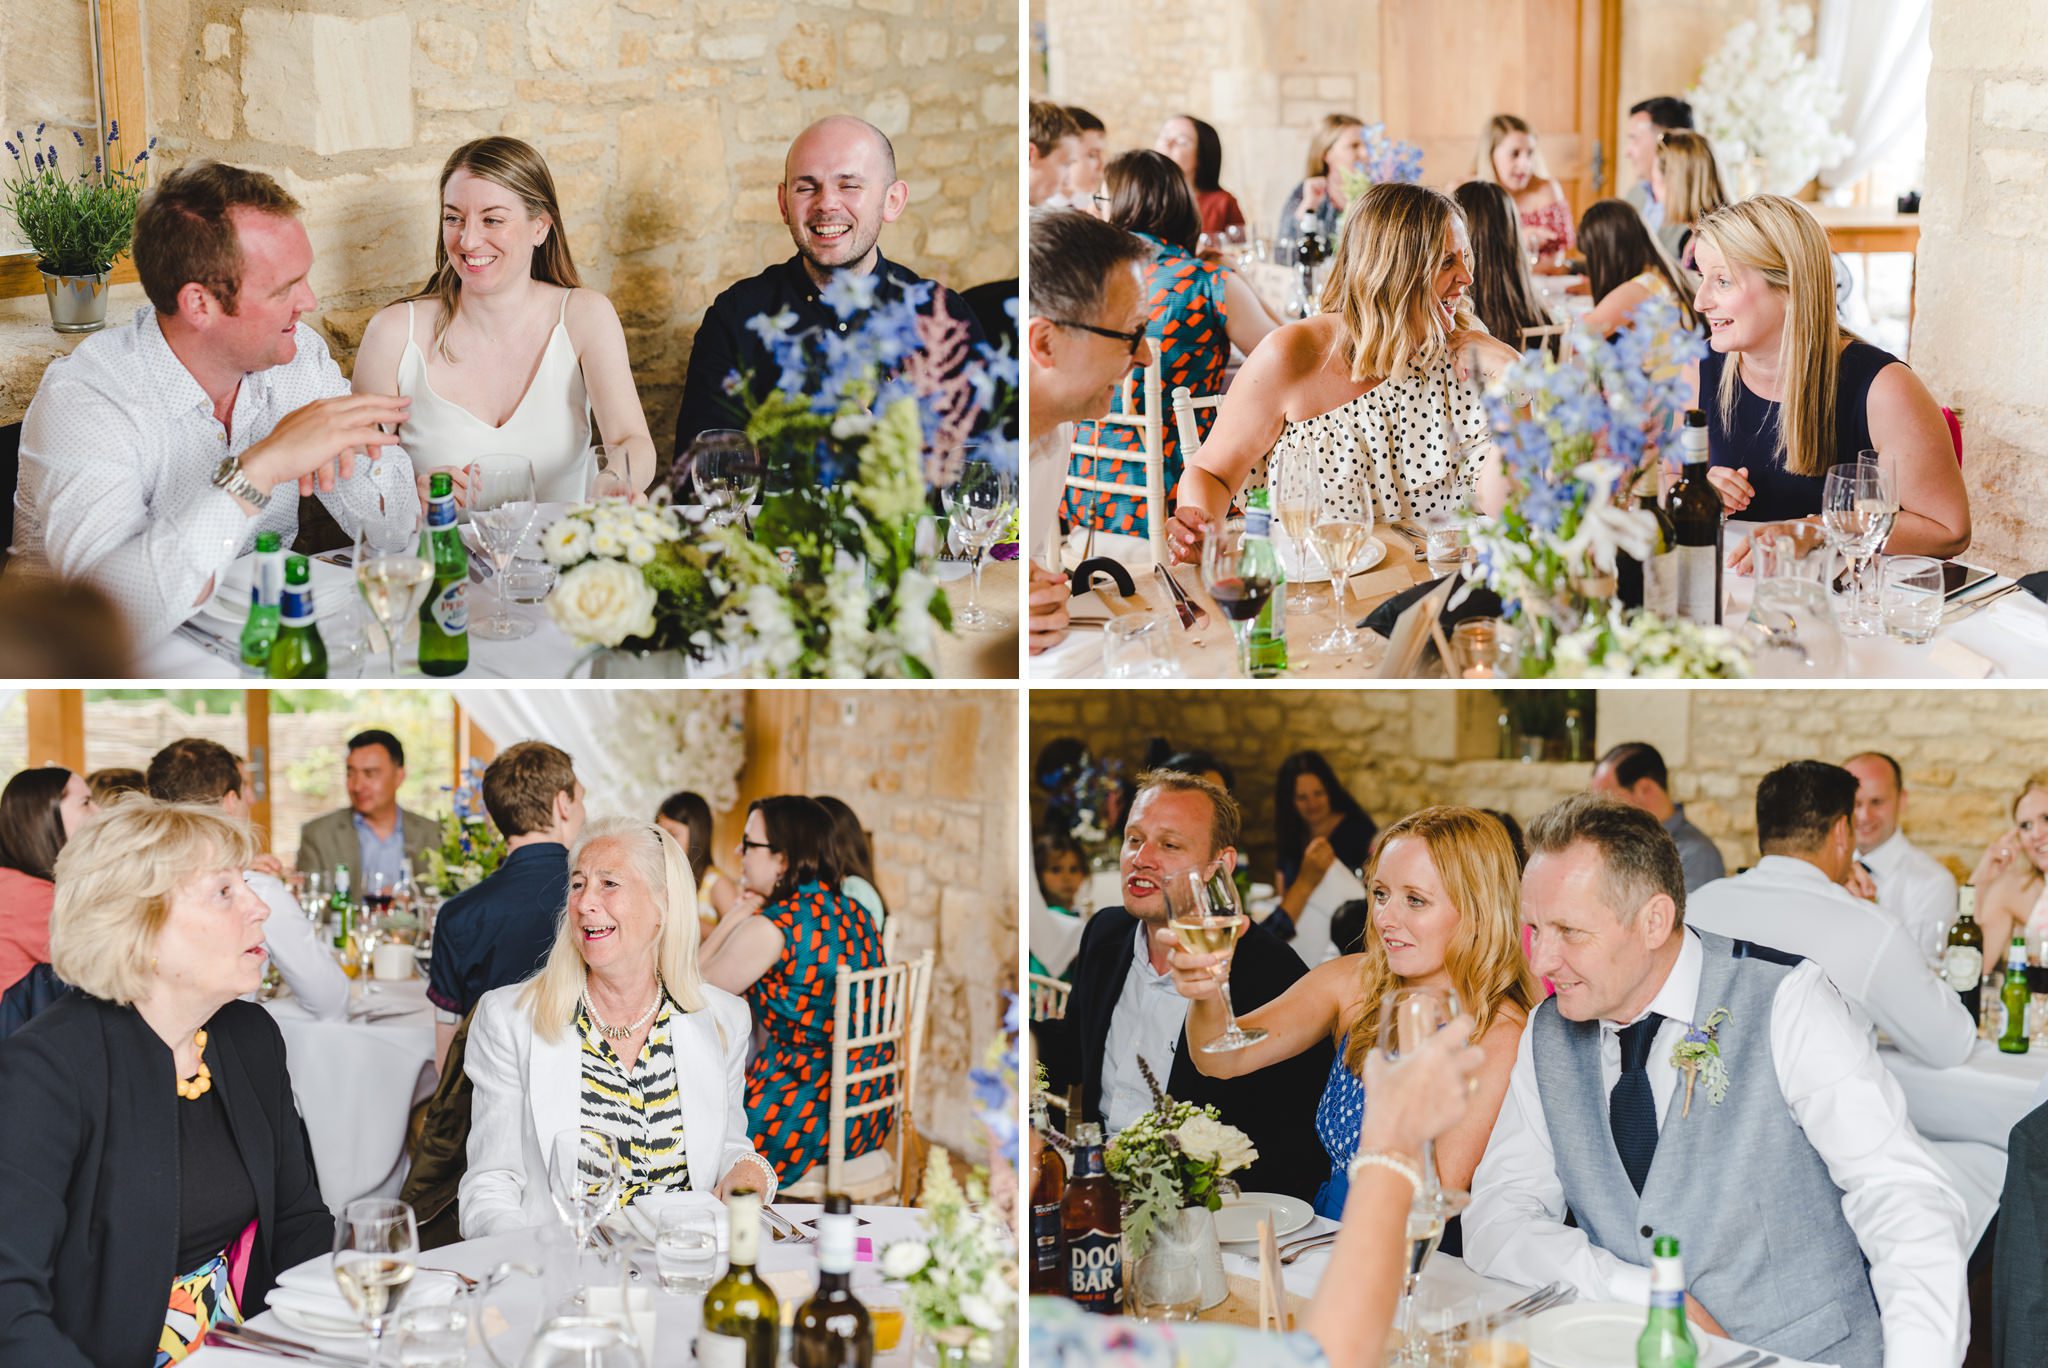 Wedding breakfast in Gloucestershire with guests dat around tables